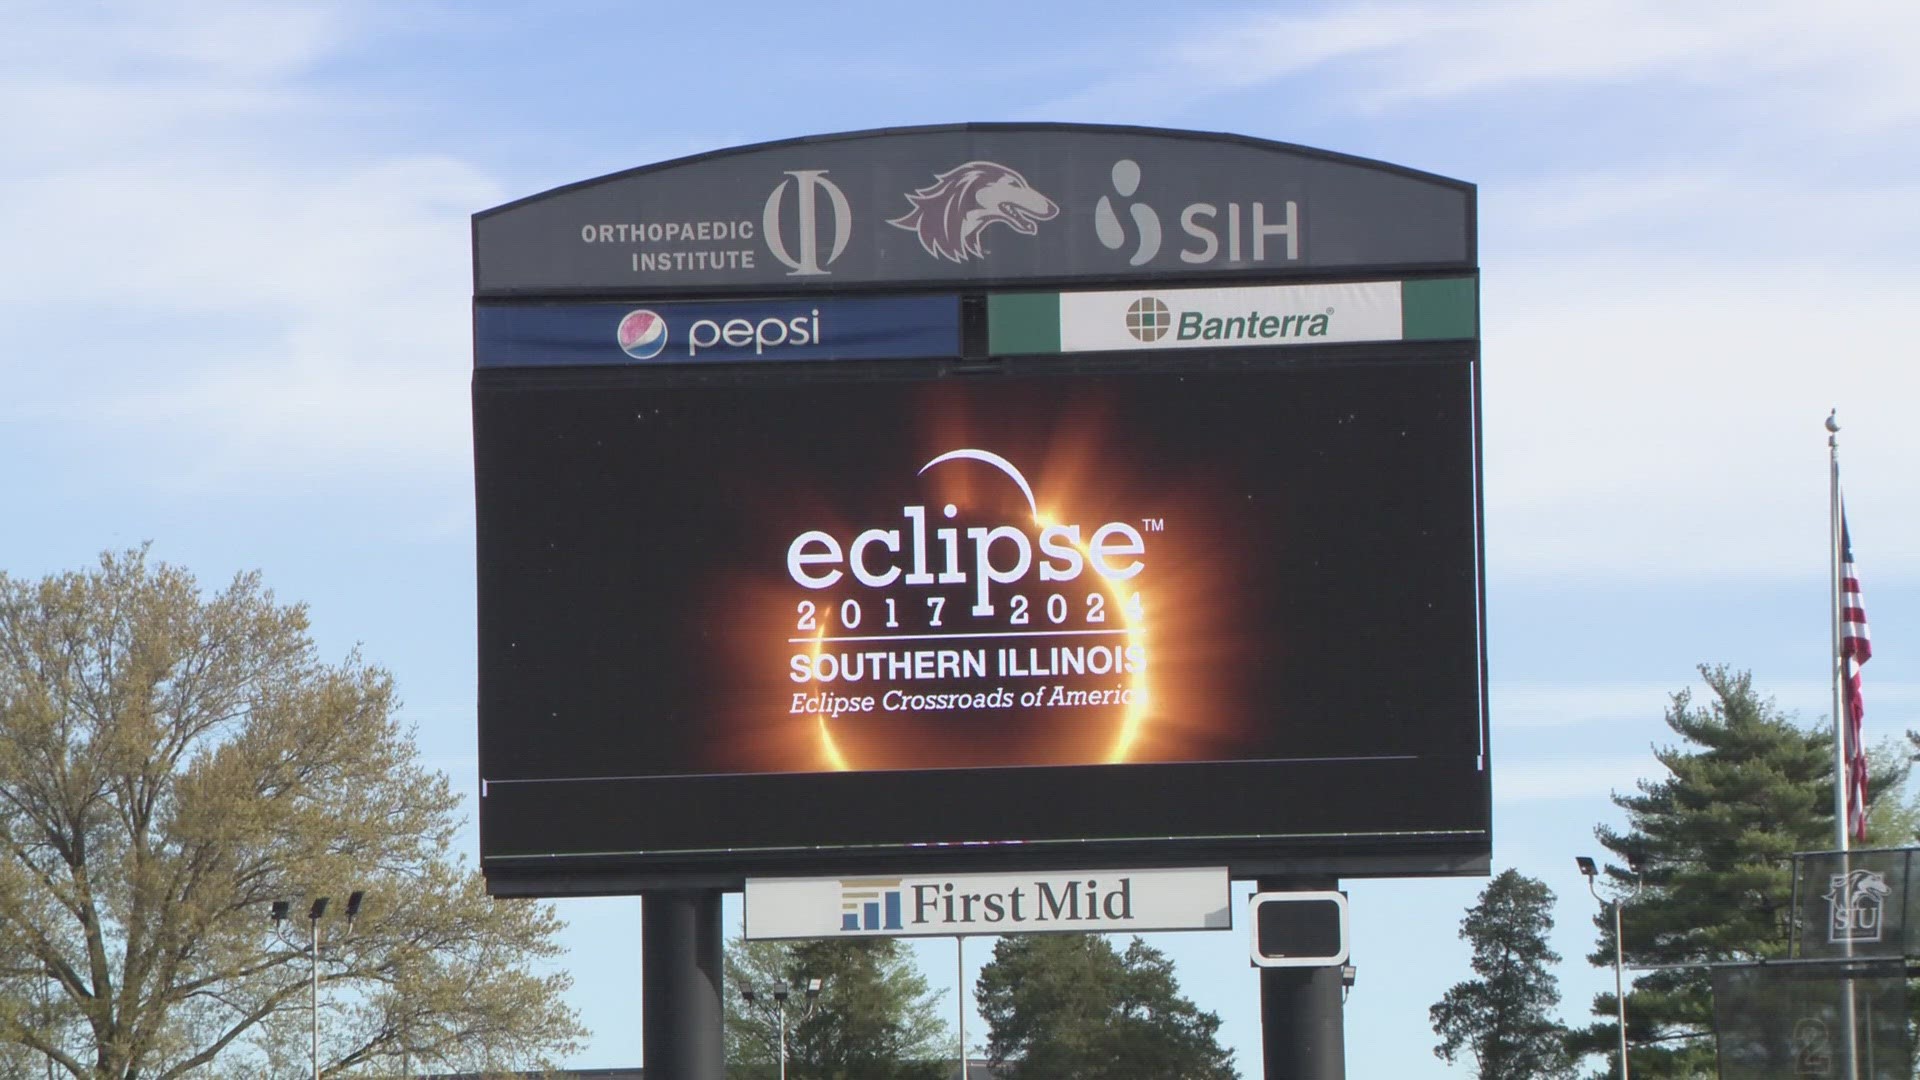 It was the second eclipse that had passed through Carbondale in the past seven years, the first being in 2017.